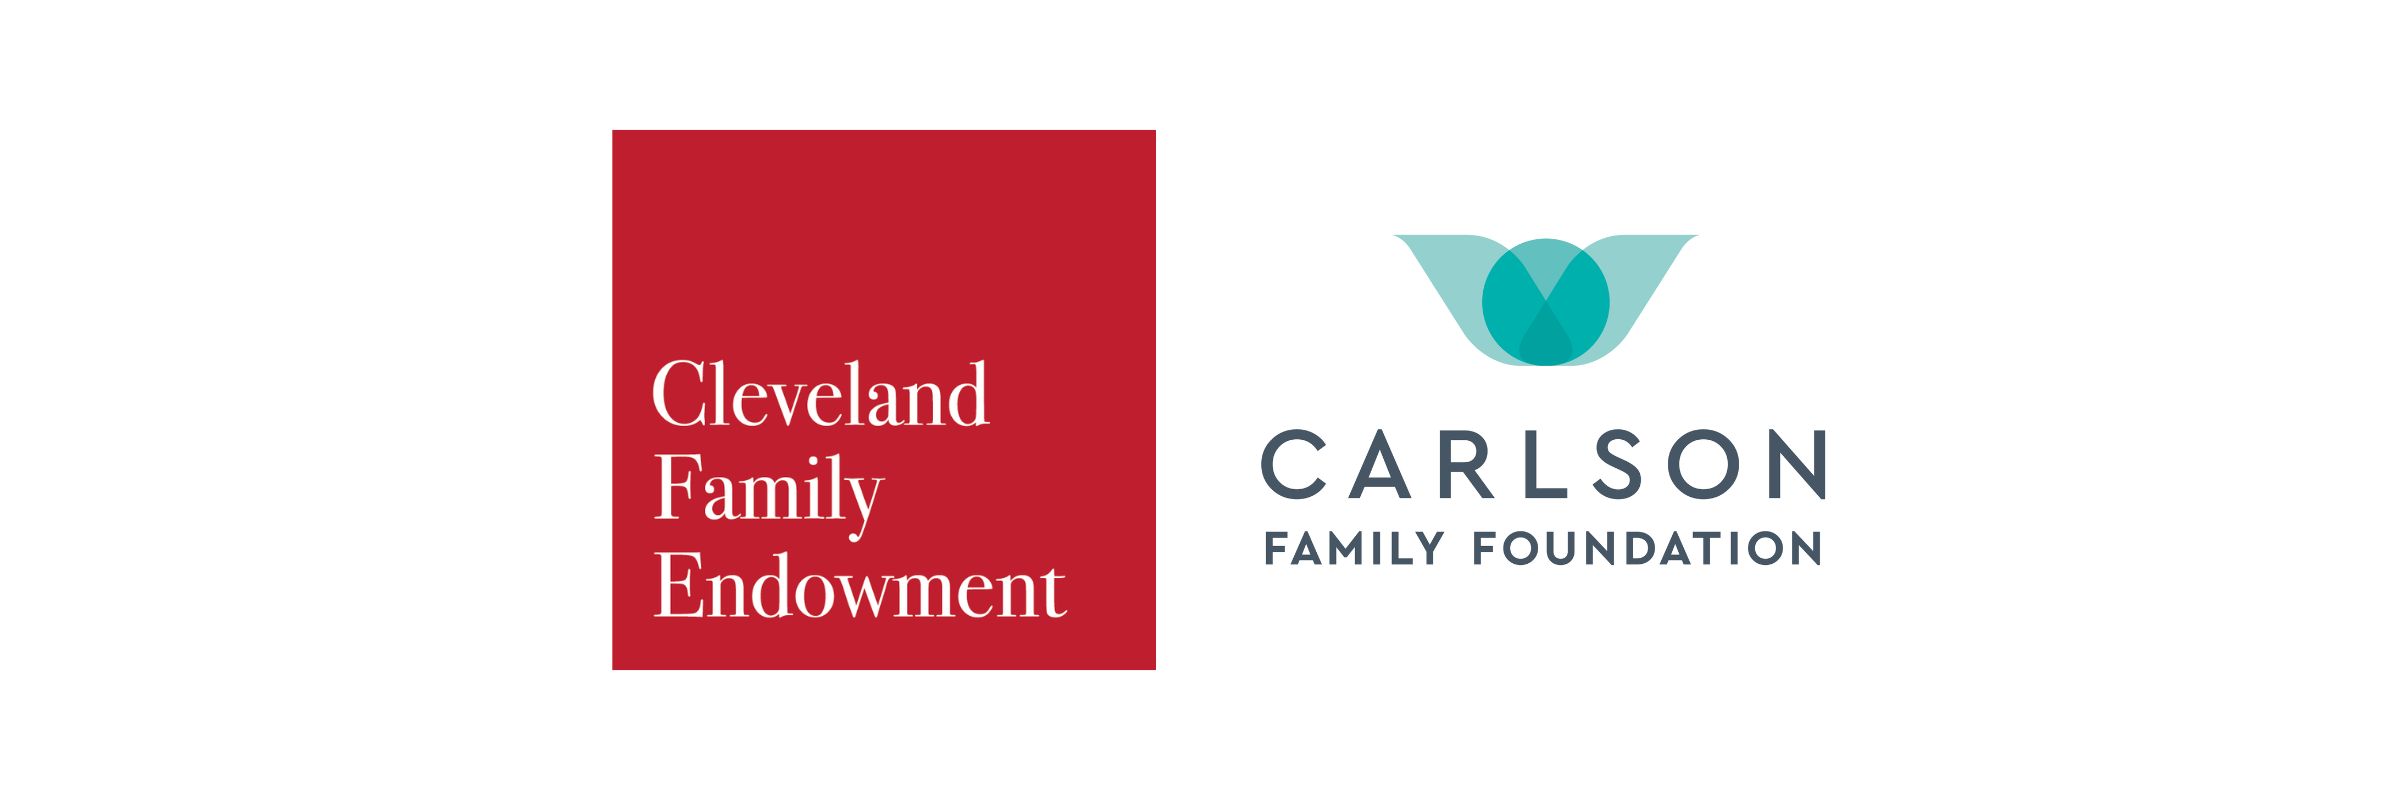 Cleveland Family Endowment and Carlson Family Foundation